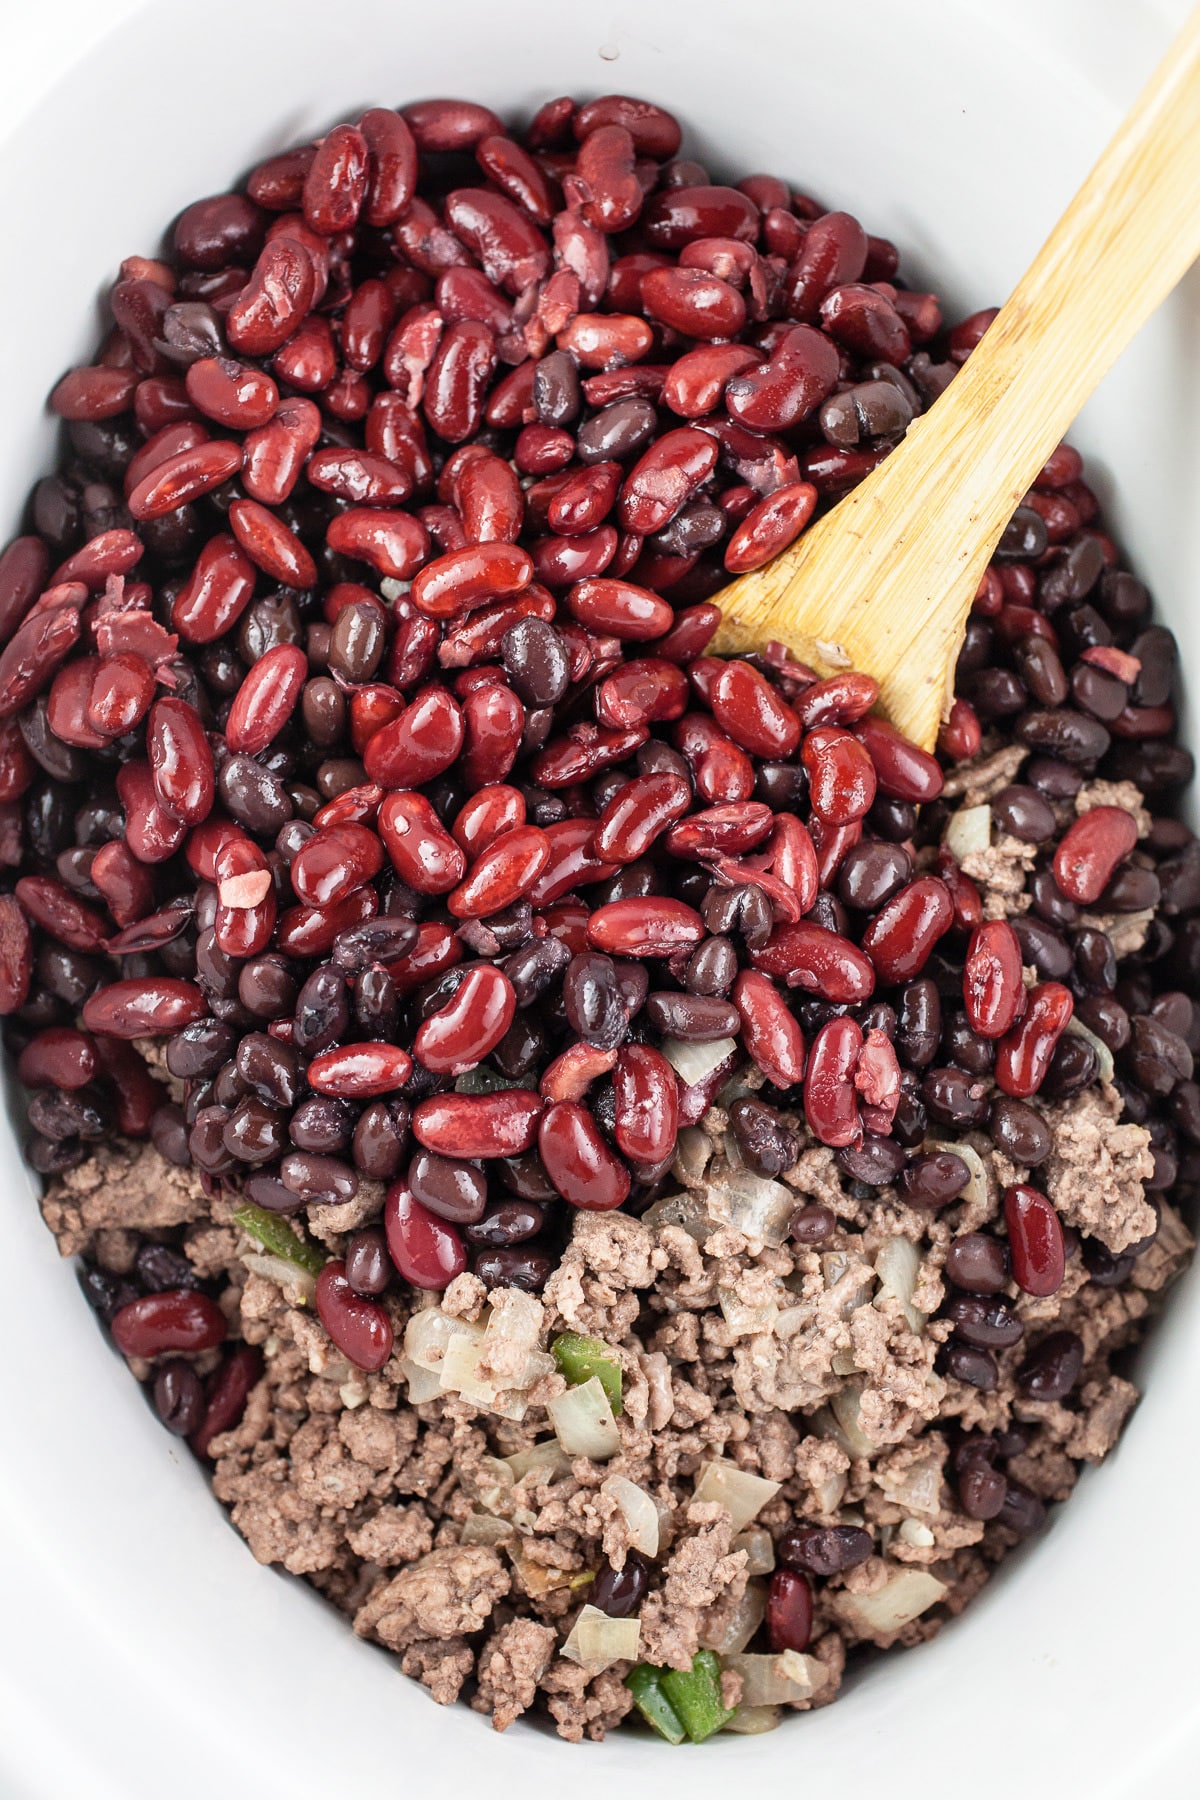 Ground beef, kidney beans, and black beans in slow cooker.